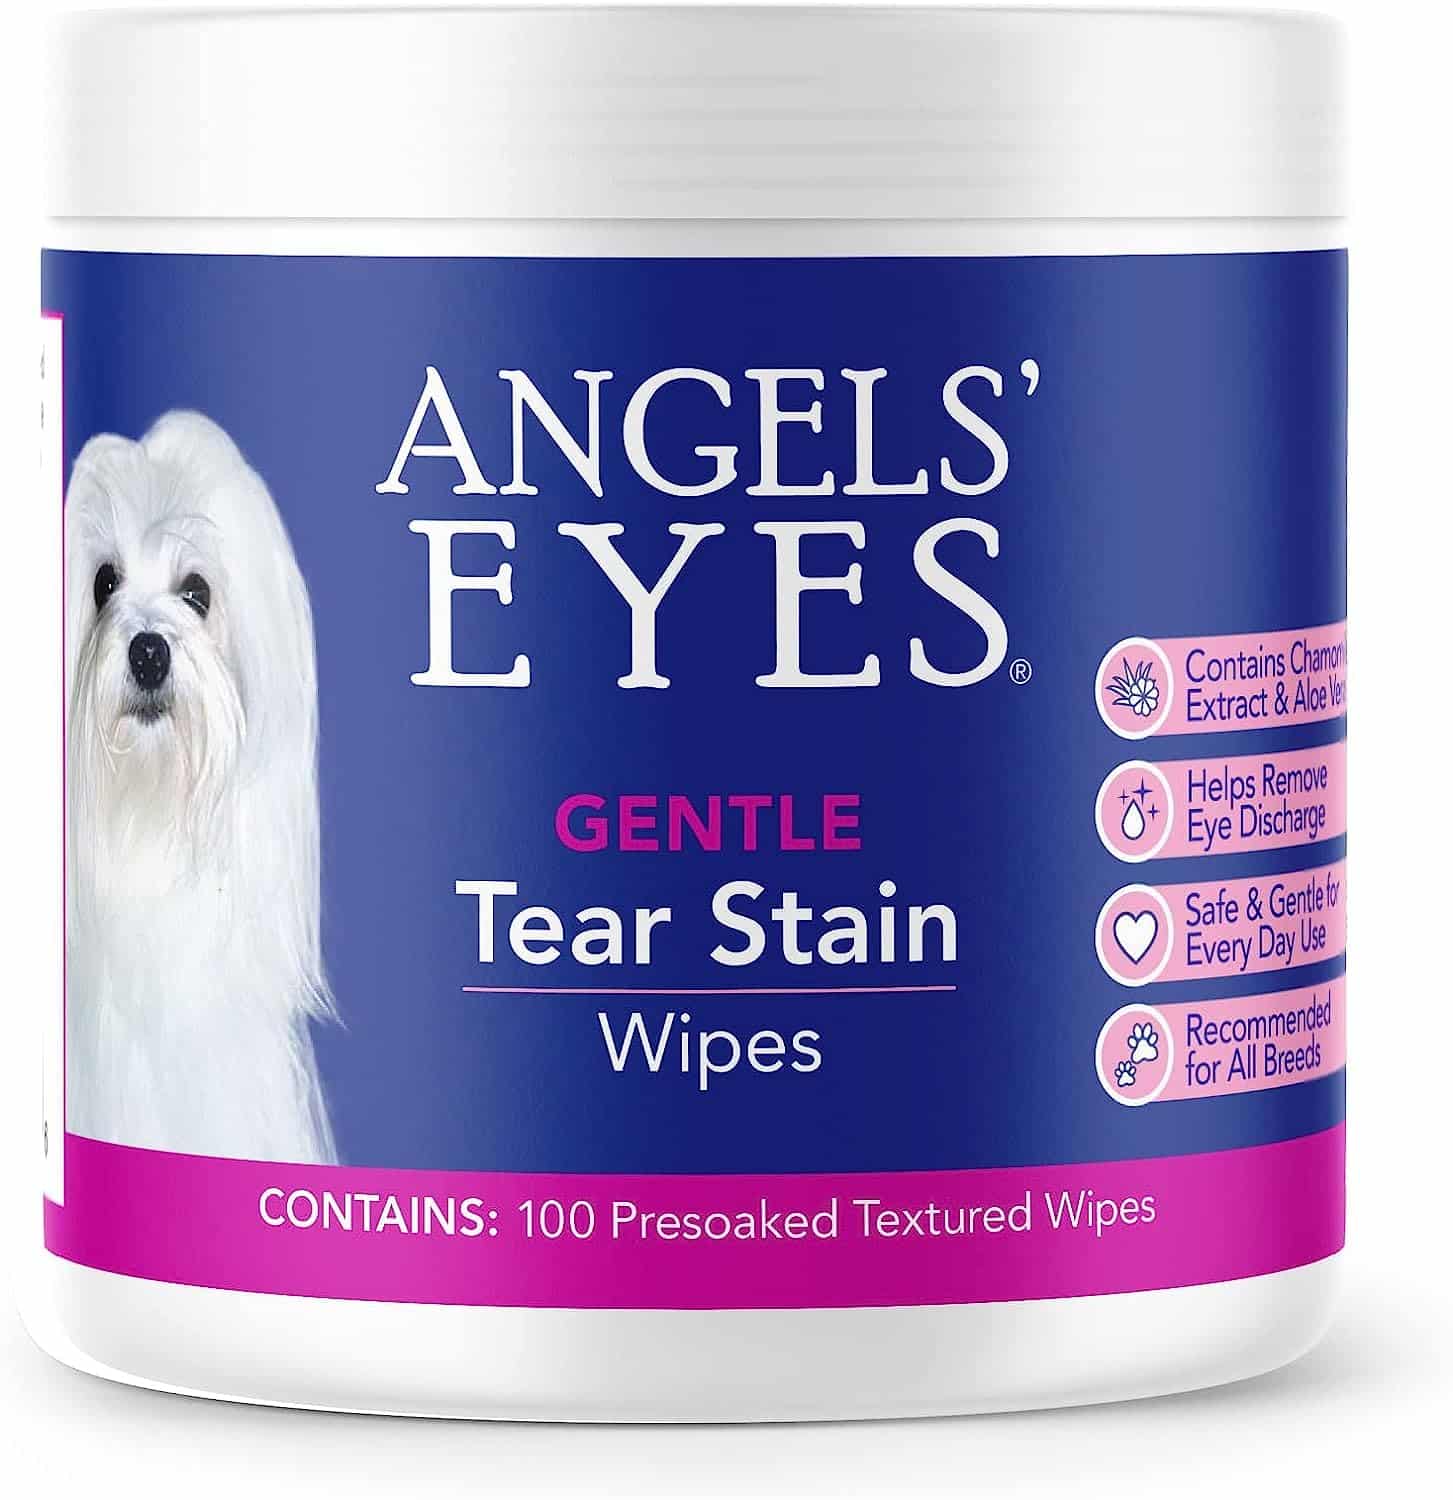 Angels’ Eyes Gentle Tear Stain Wipes Review: Say Goodbye to Eye Discharge and Irritations